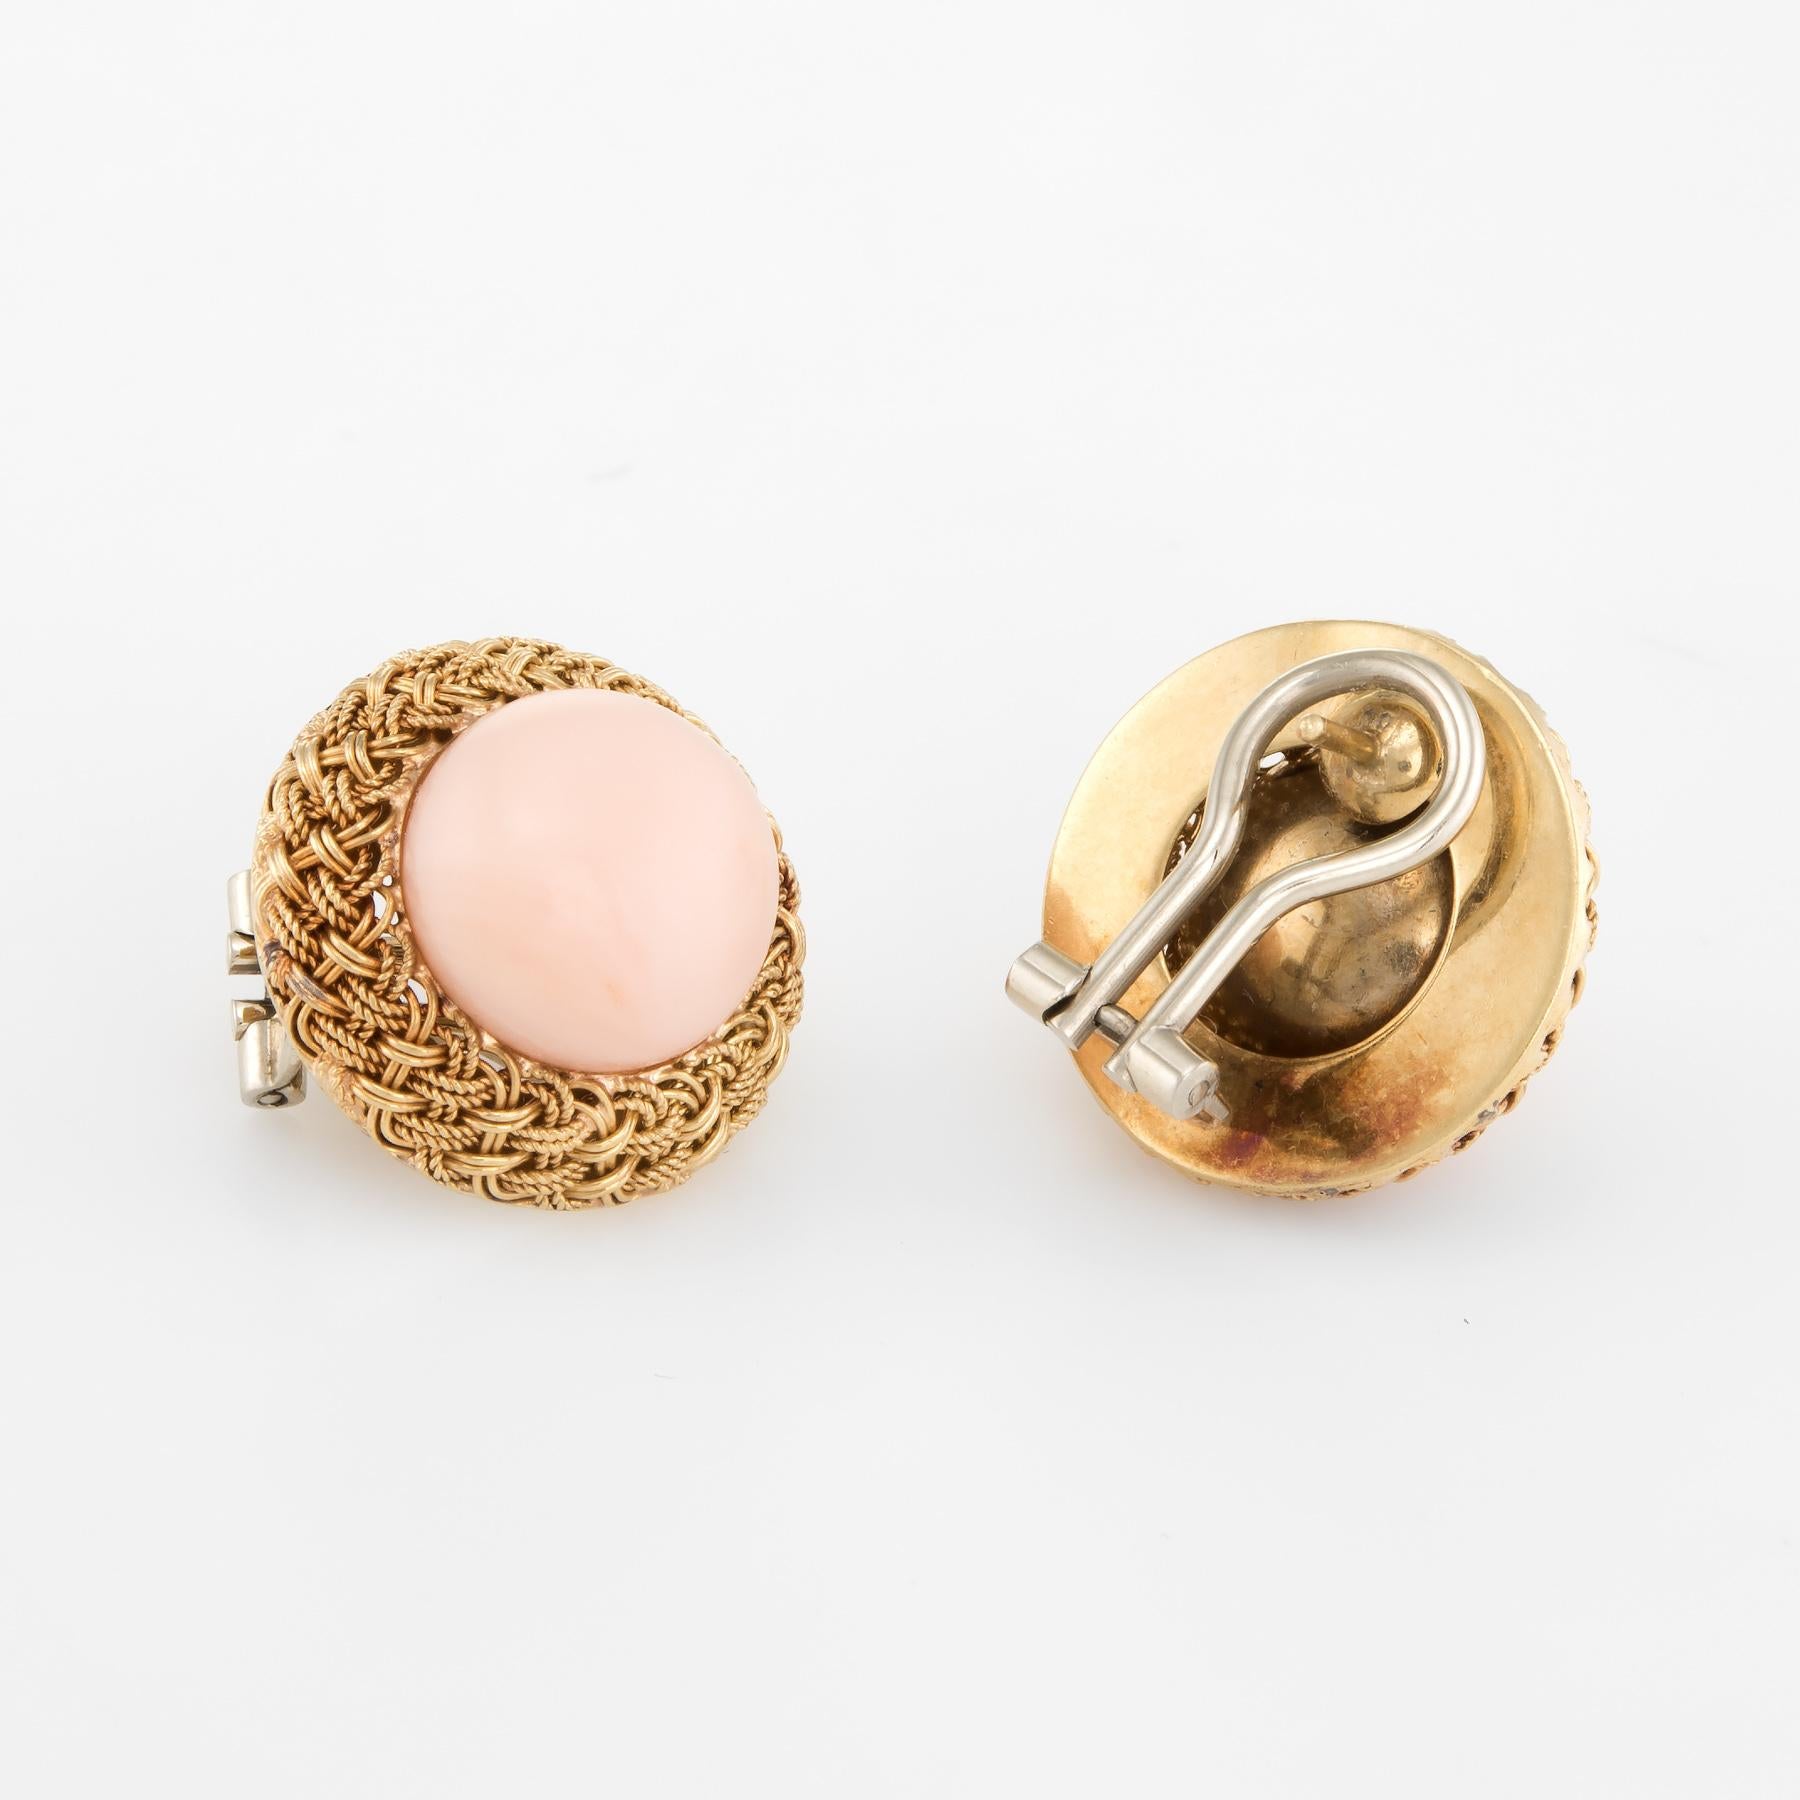 Elegant pair of vintage angel skin coral earrings (circa 1950s to 1960s), crafted in 18k yellow gold. 

Round cabochon cut angel skin coral measures 13mm each (estimated at 10 carats each - 20 carats total estimated weight). The coral is in